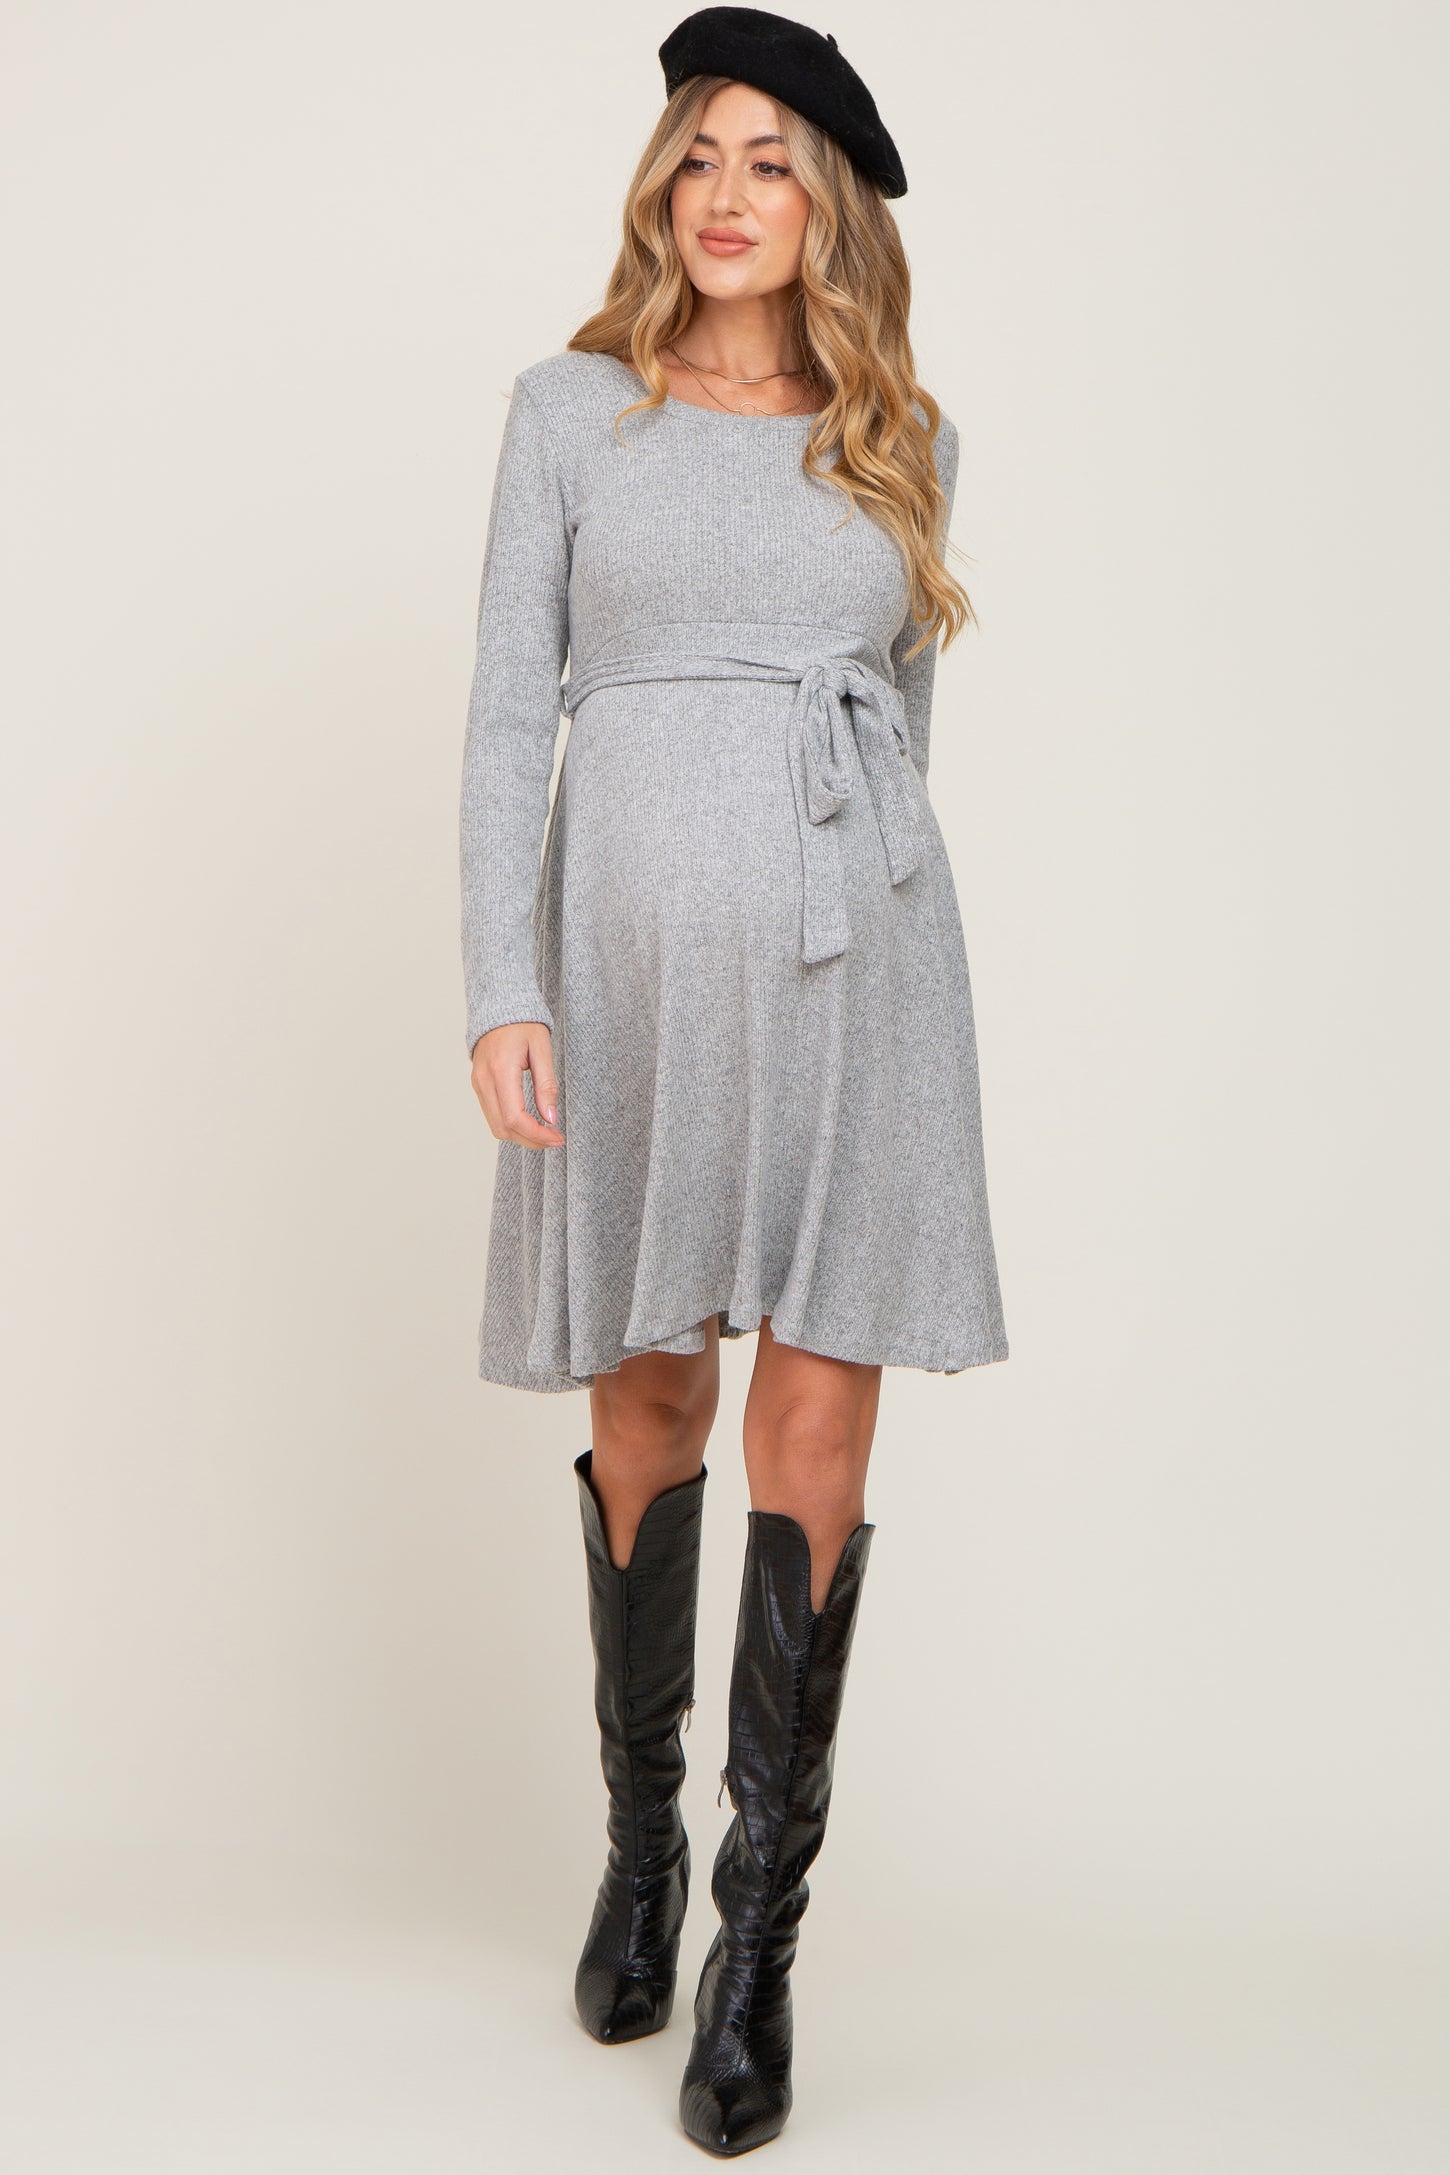 Textured Knit Maternity Dress in Grey by Ripe Maternity